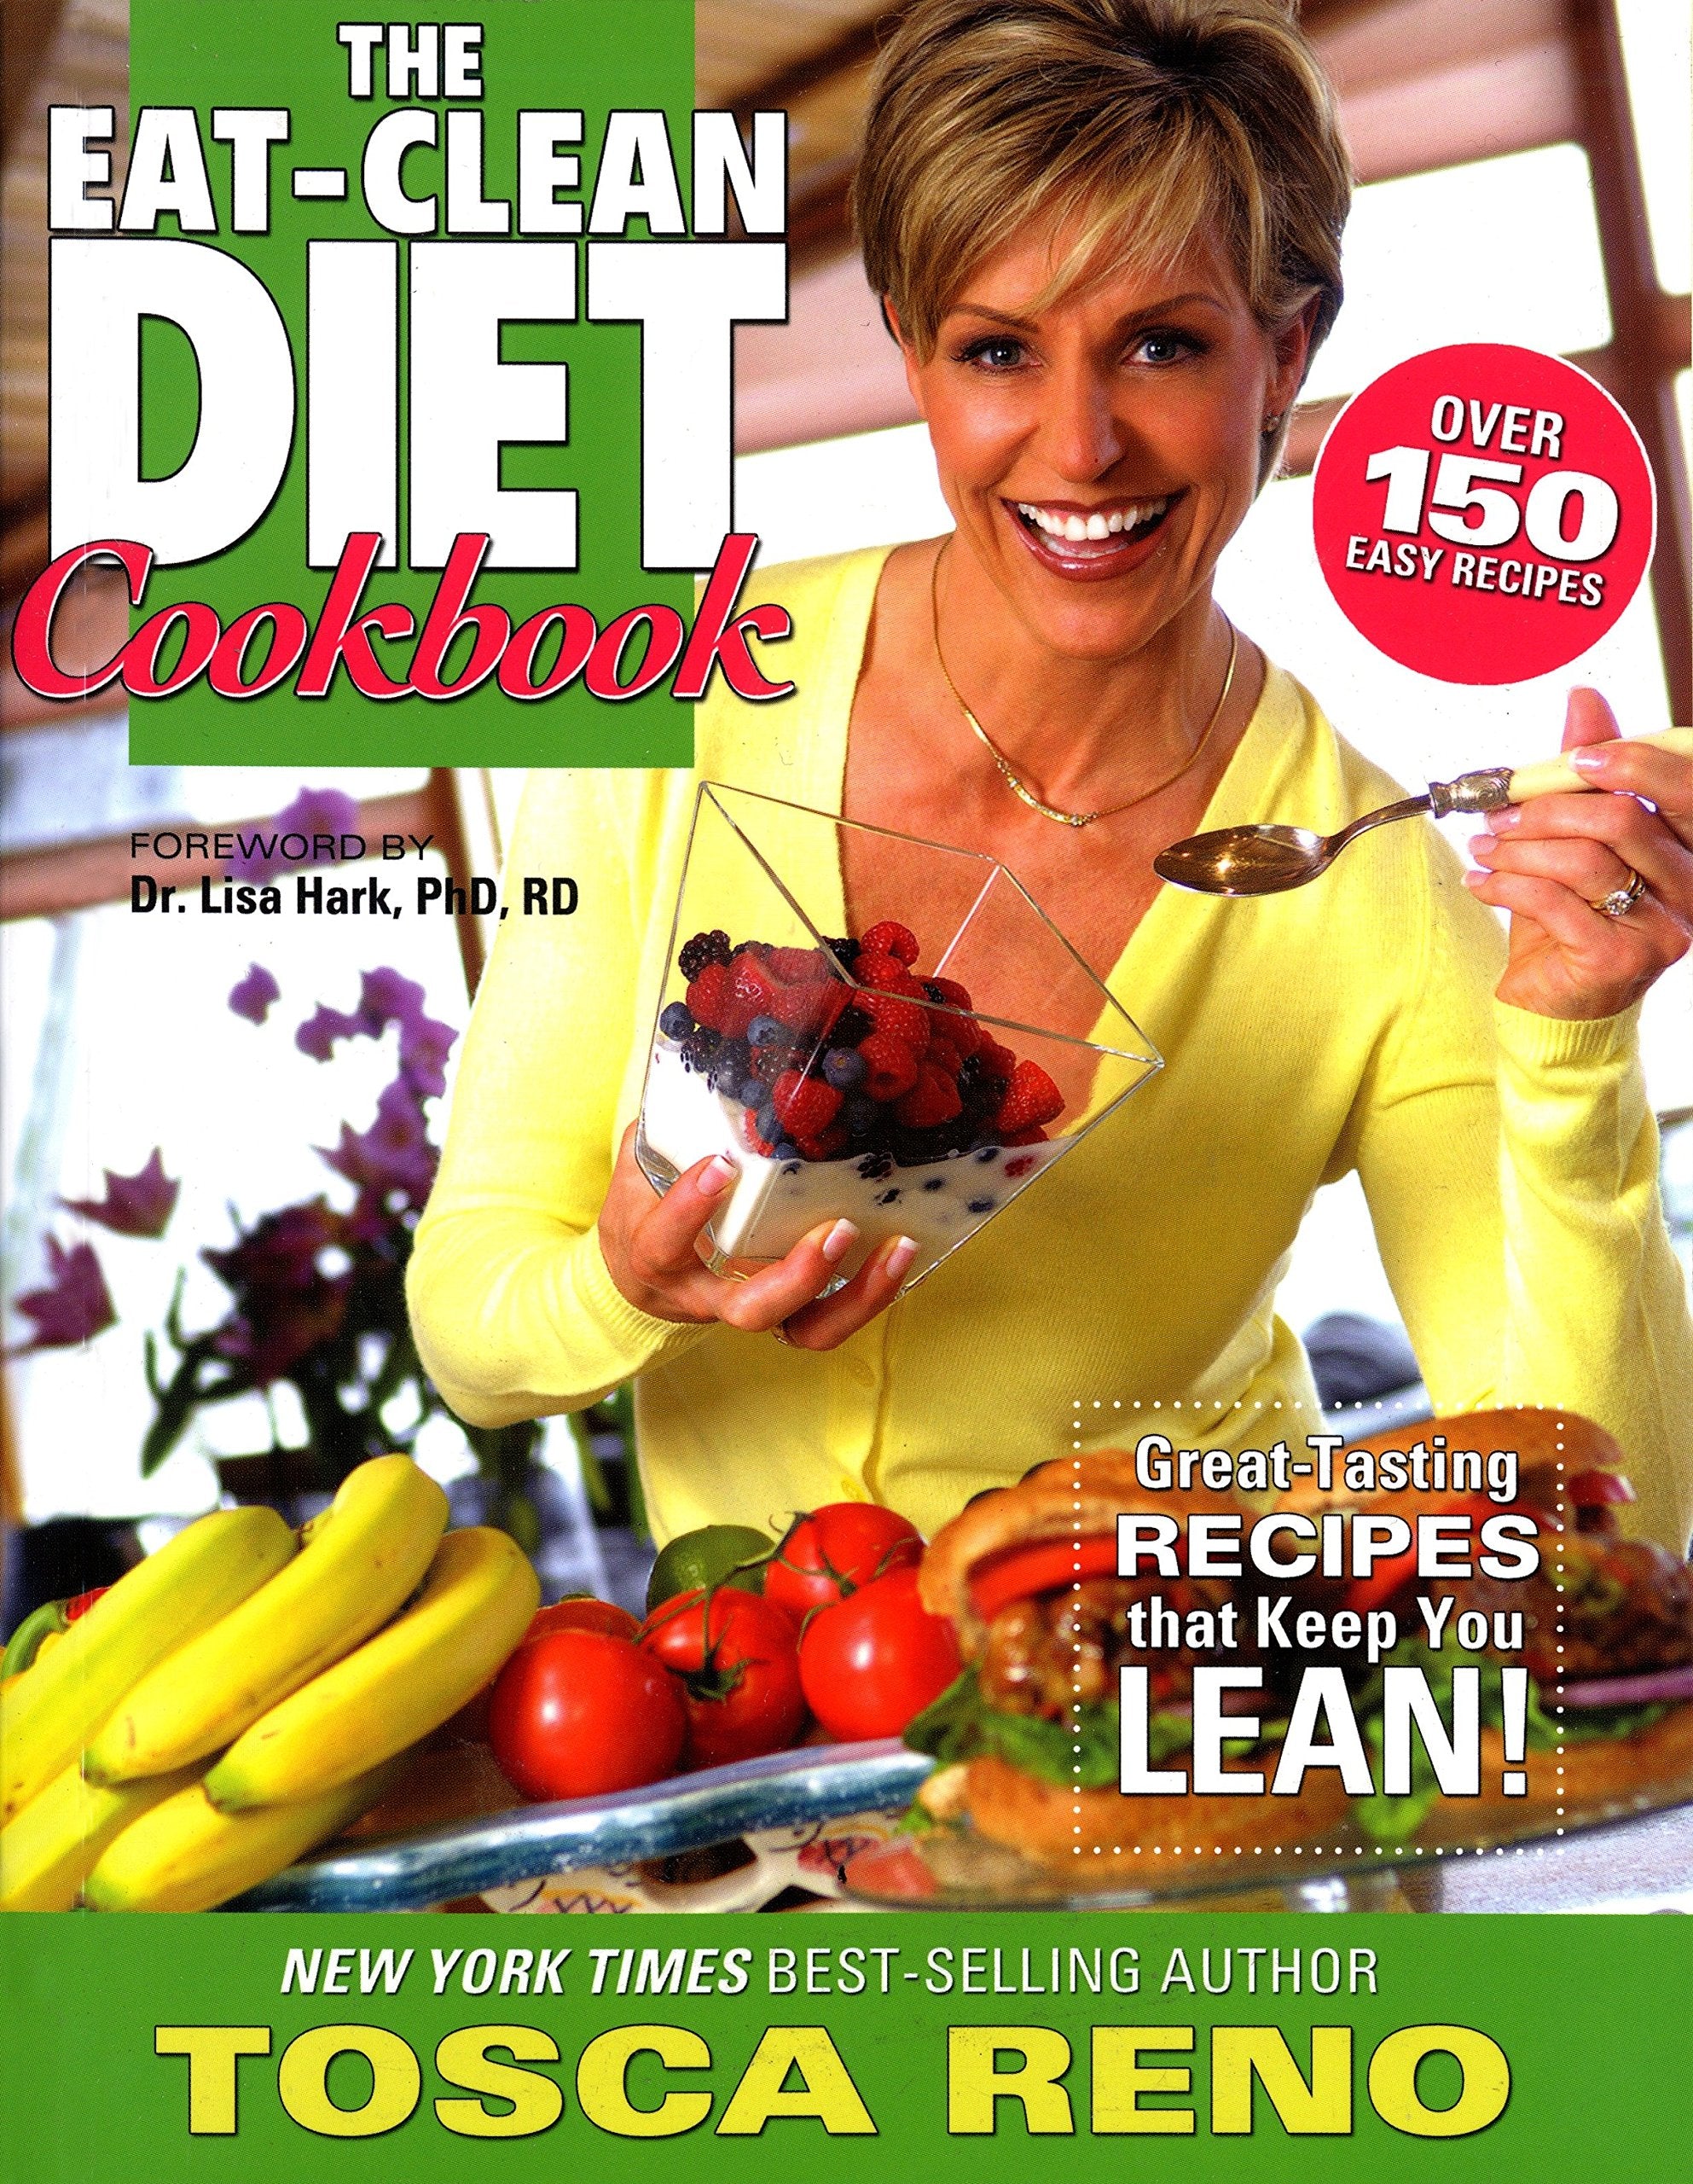 Livre ISBN 1552100448 The Eat-Clean Diet Cookbook: Great-Tasting Recipes That Keep You Lean!